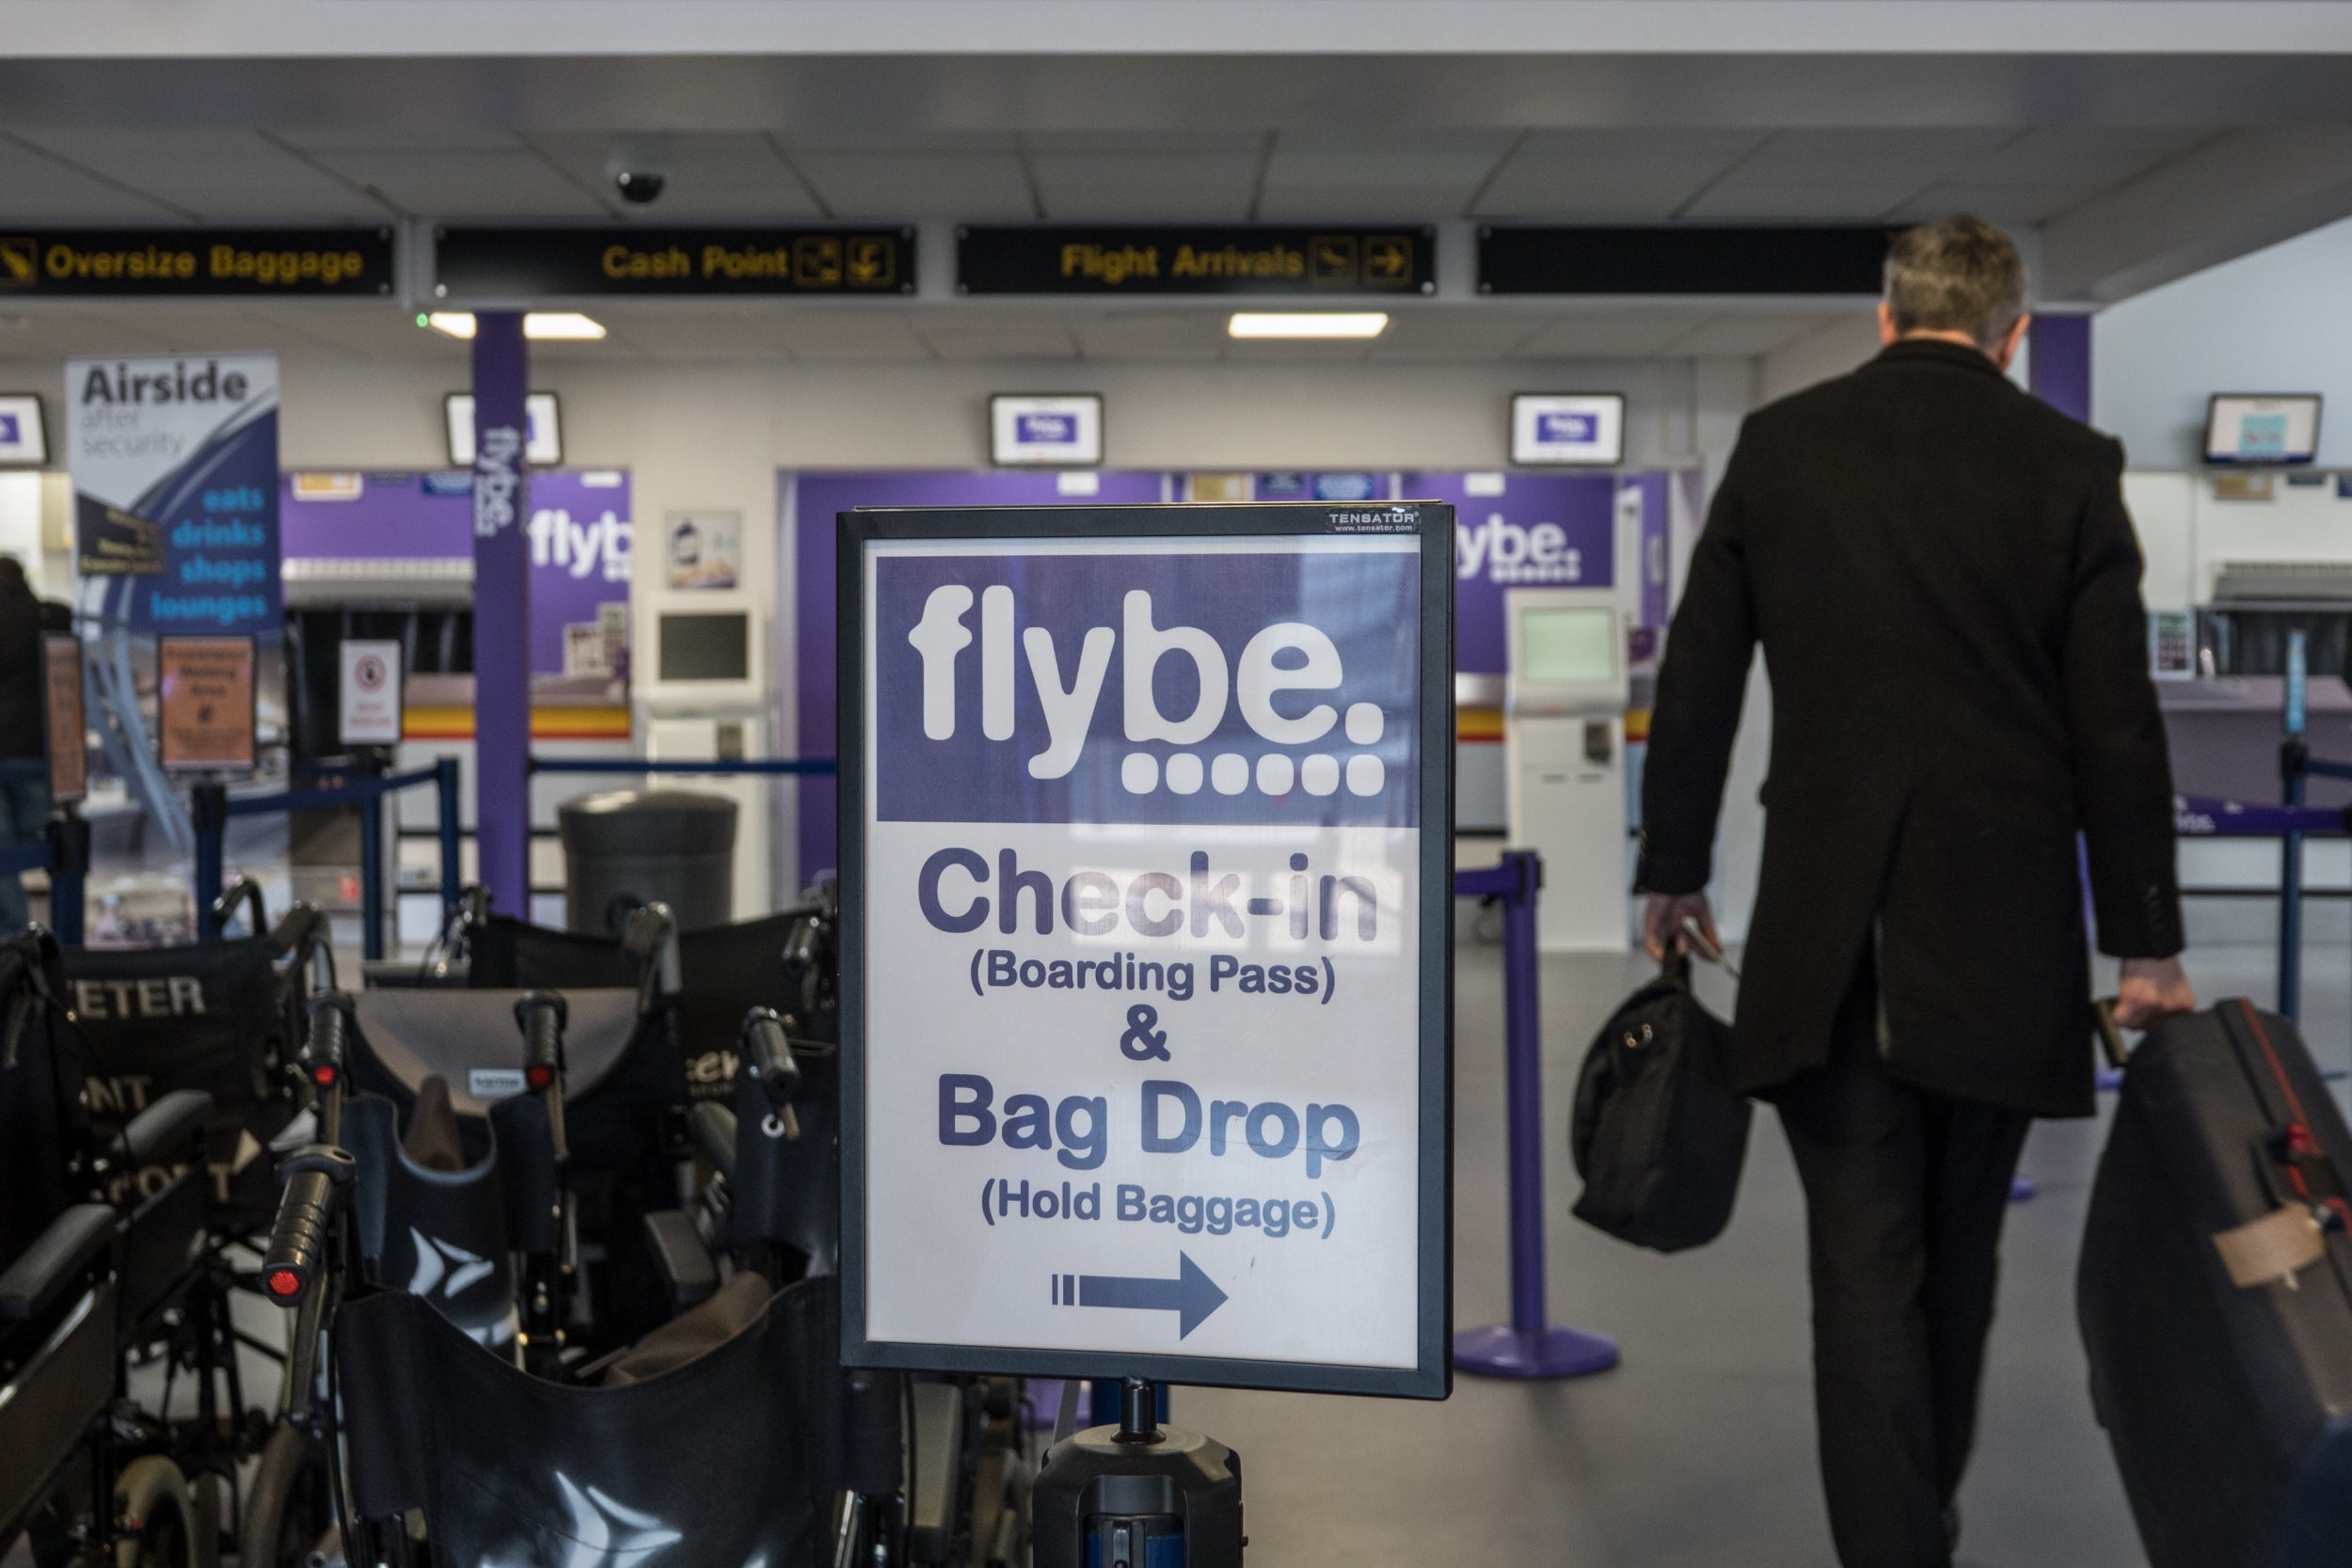 Flybe was the first significant airline to charge for baggage